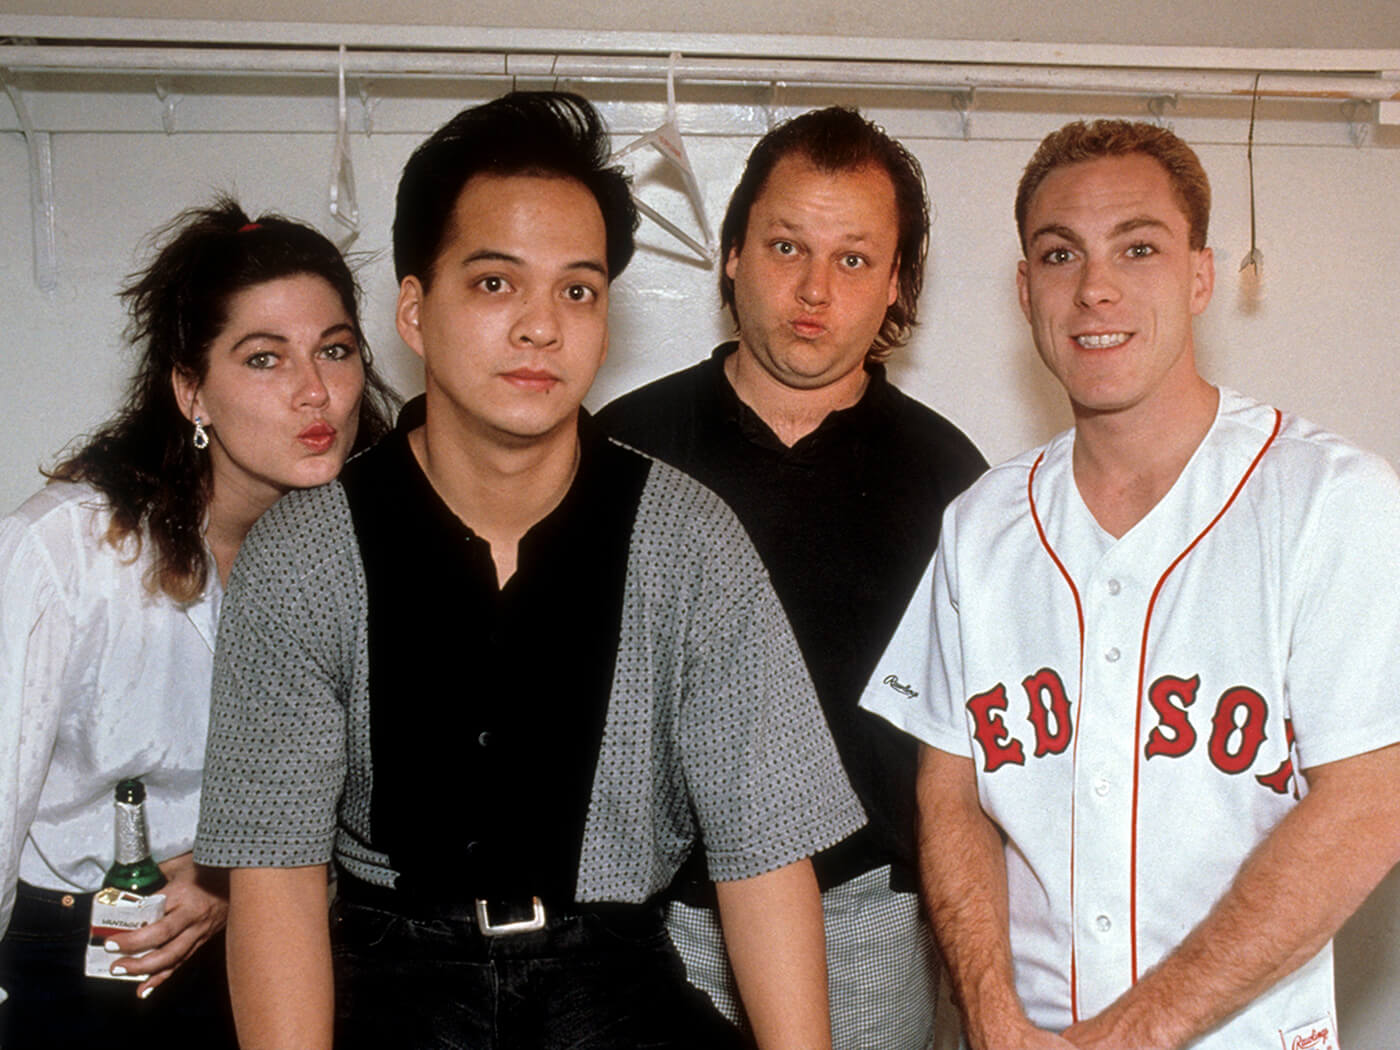 The Pixies, photographed in 1992 by, photo by Clayton Call/Redferns via Getty Images